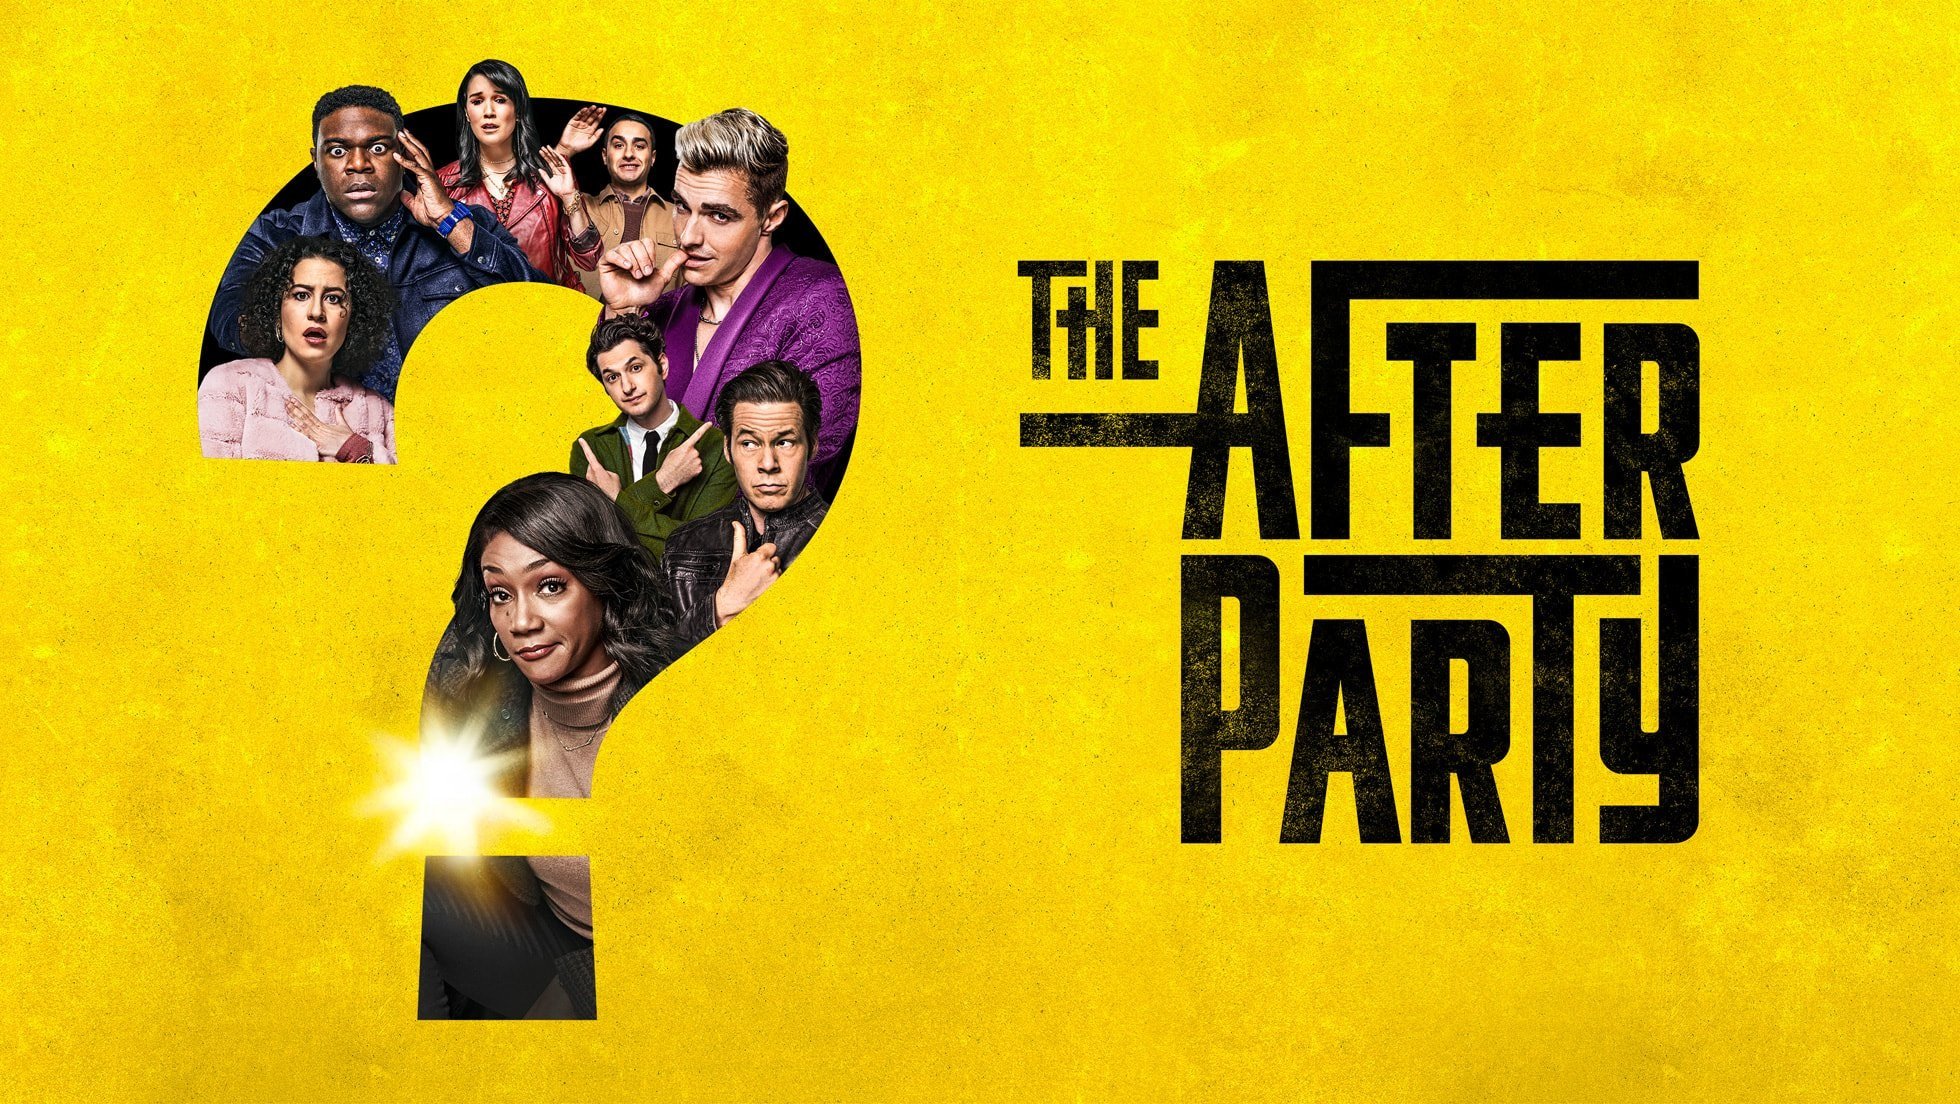 Apple_TV_The_Afterparty_key_art_graphic_header_16_9_show_home.jpg.large_2x.jpg